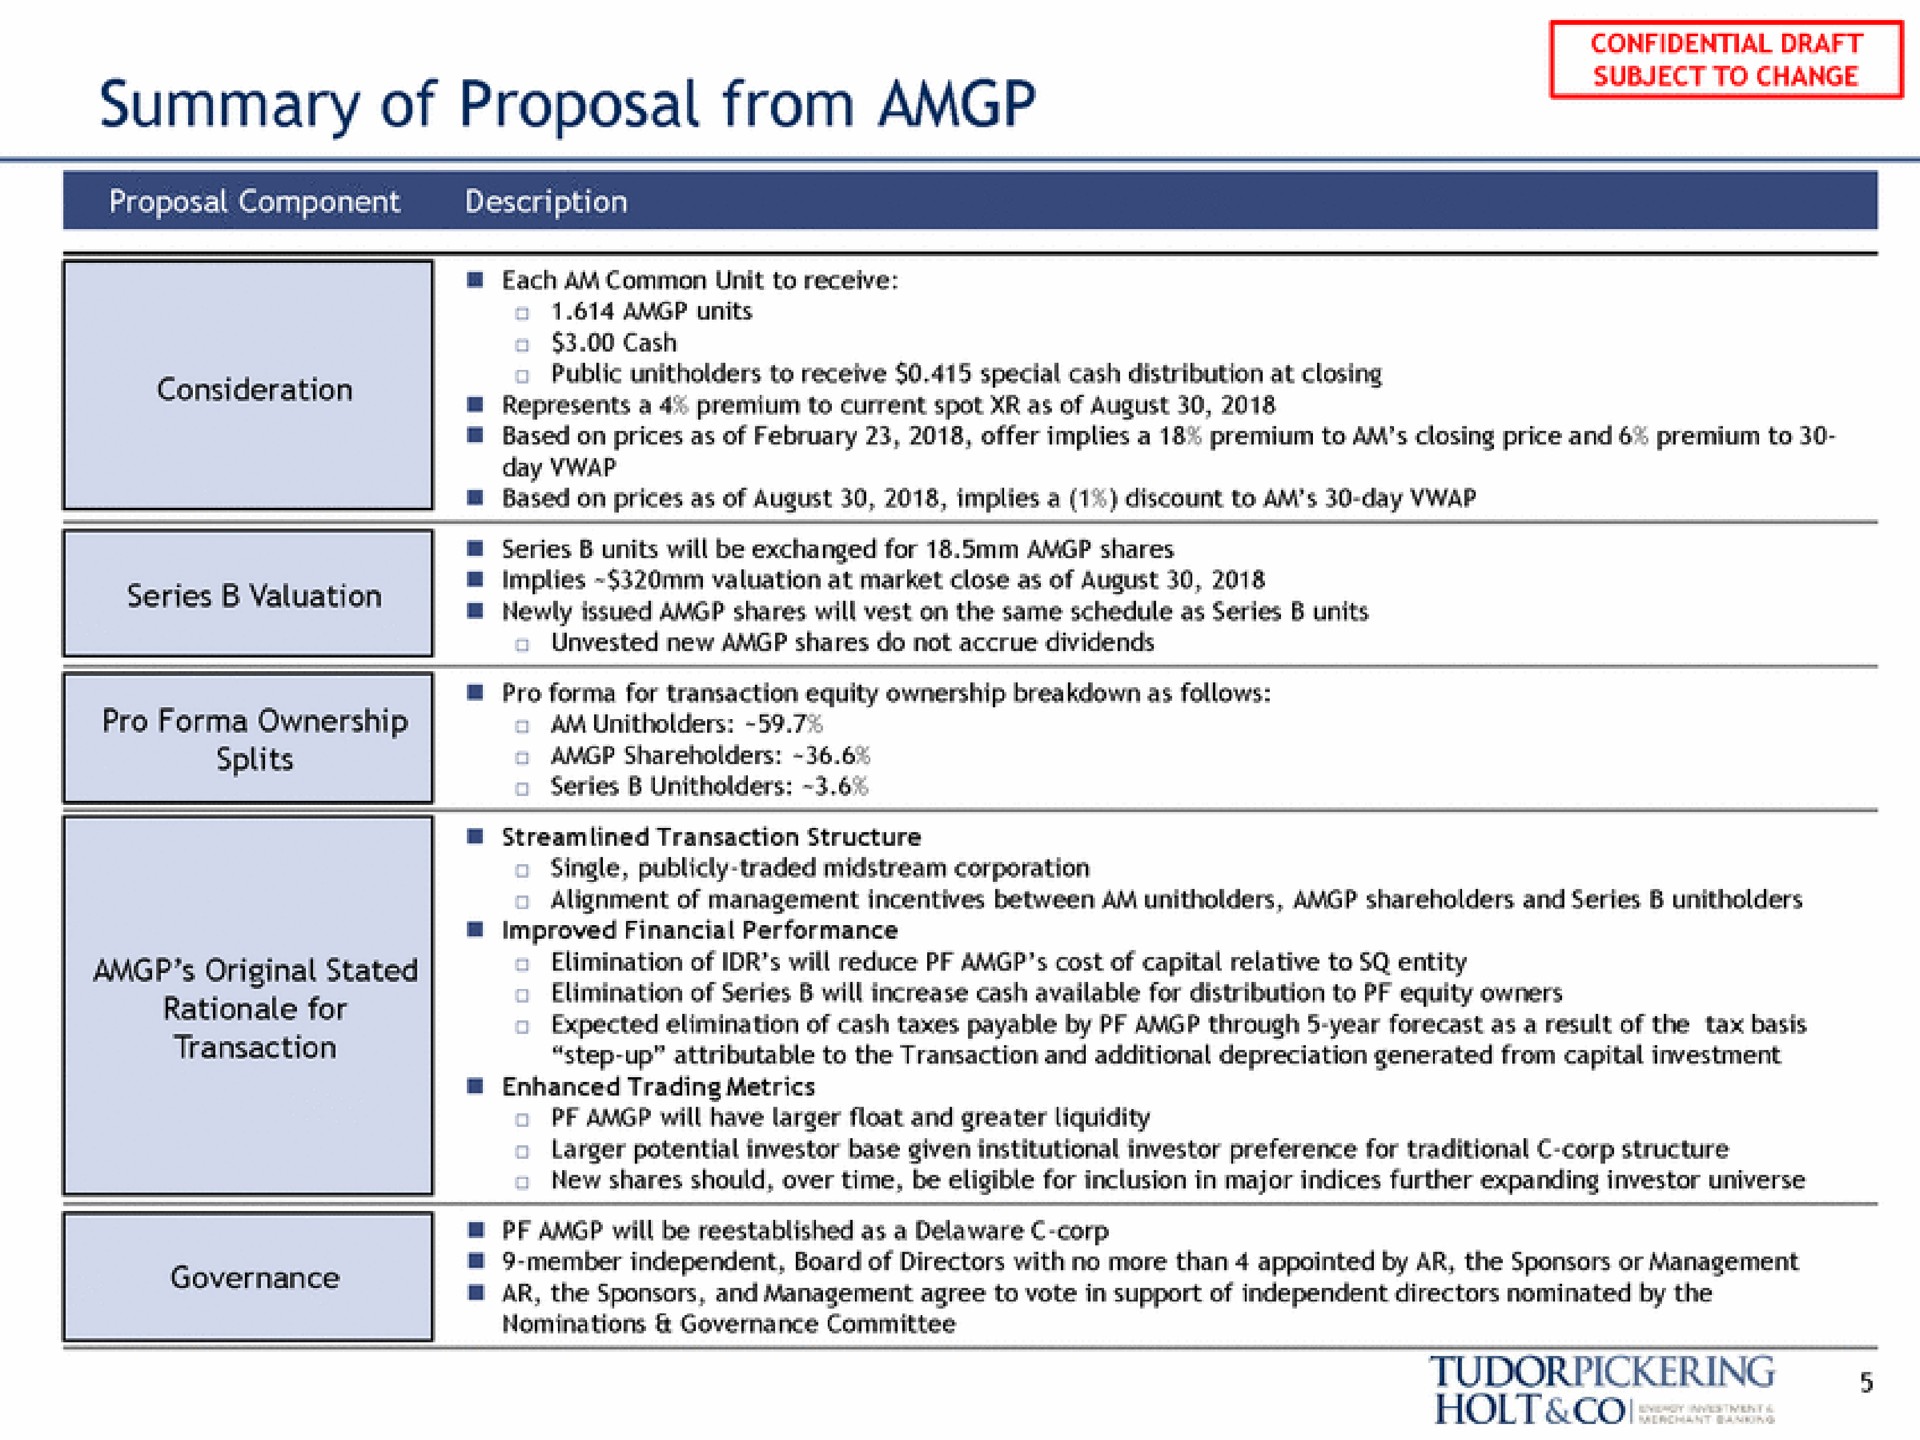 summary of proposal from | Tudor, Pickering, Holt & Co